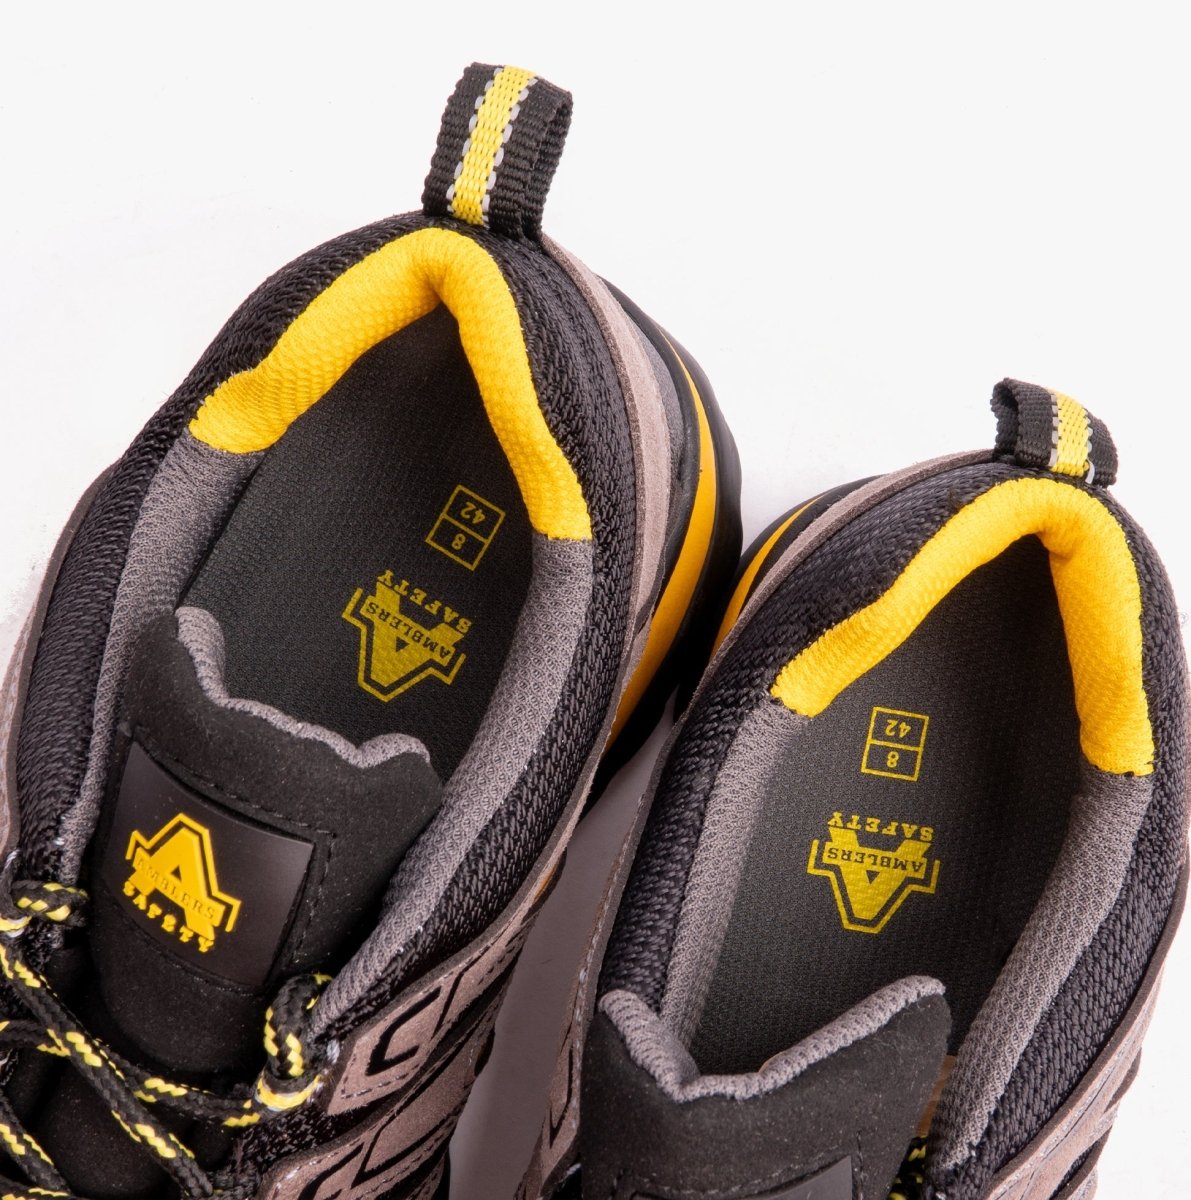 Amblers Safety FS42C Unisex Safety Trainers Black/Yellow 20414 - 32257 - 03 | STB.co.uk